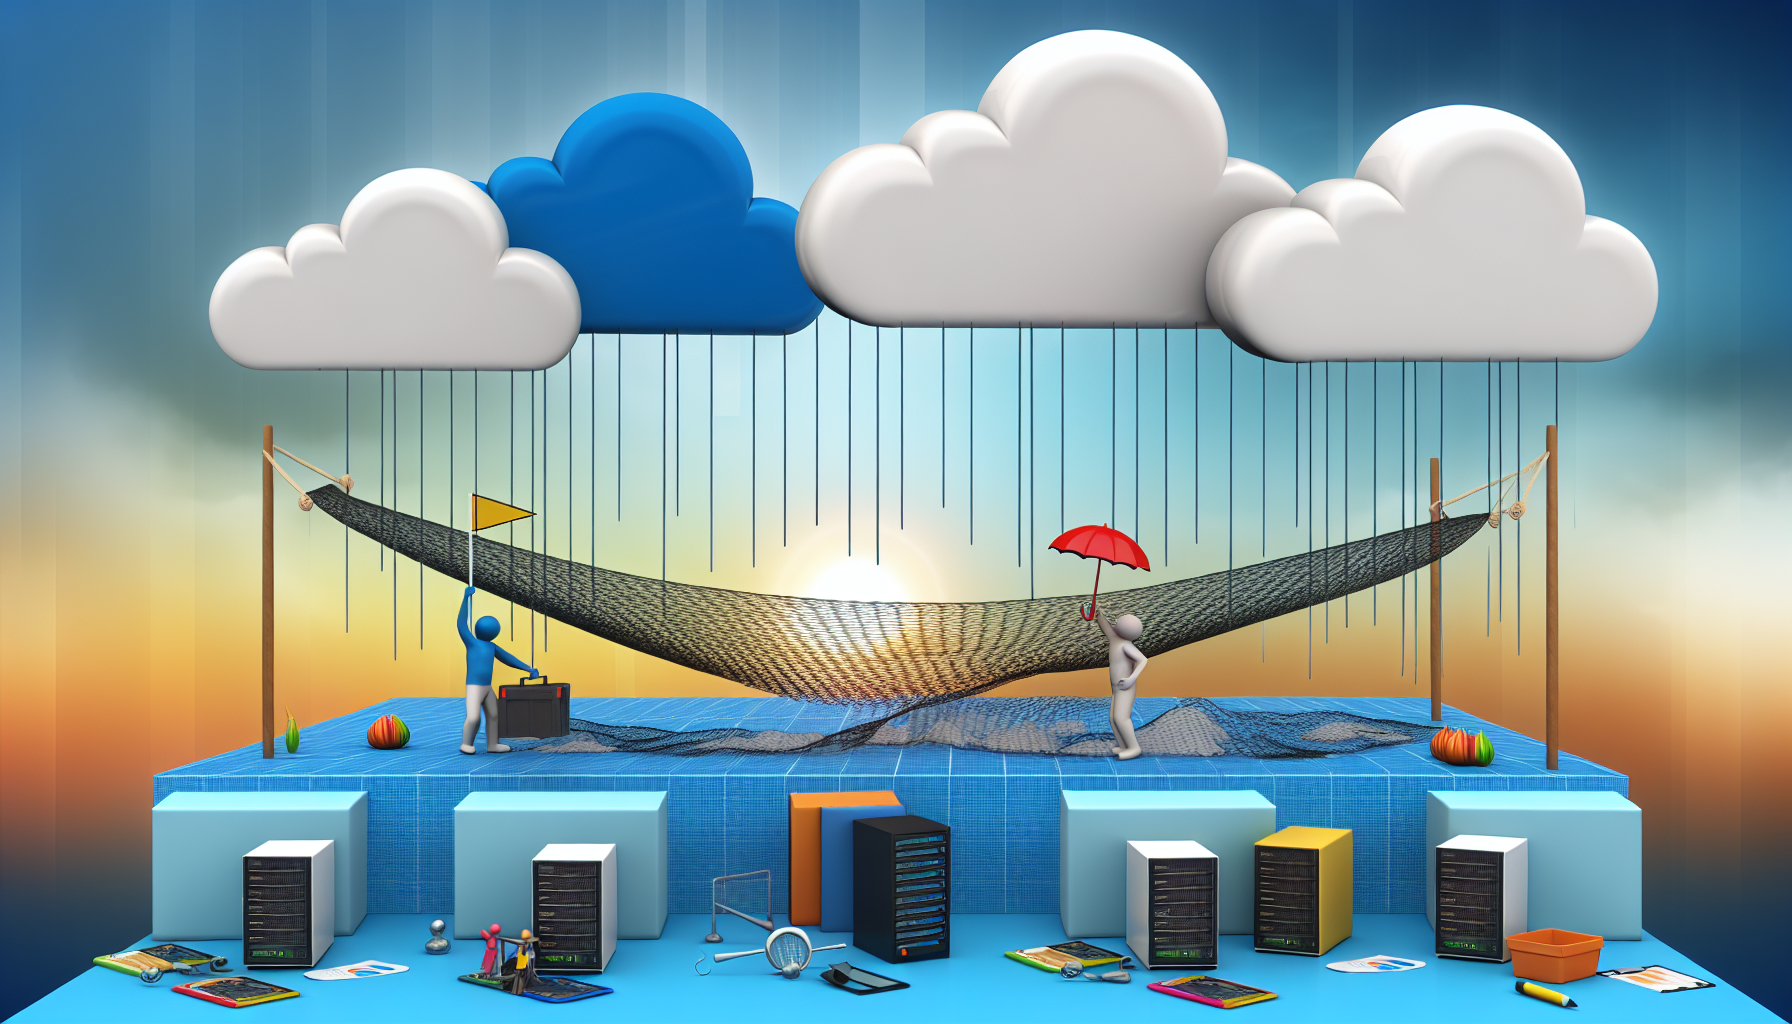 Microsoft azure outage: resilience in the face of cloud computing challenges